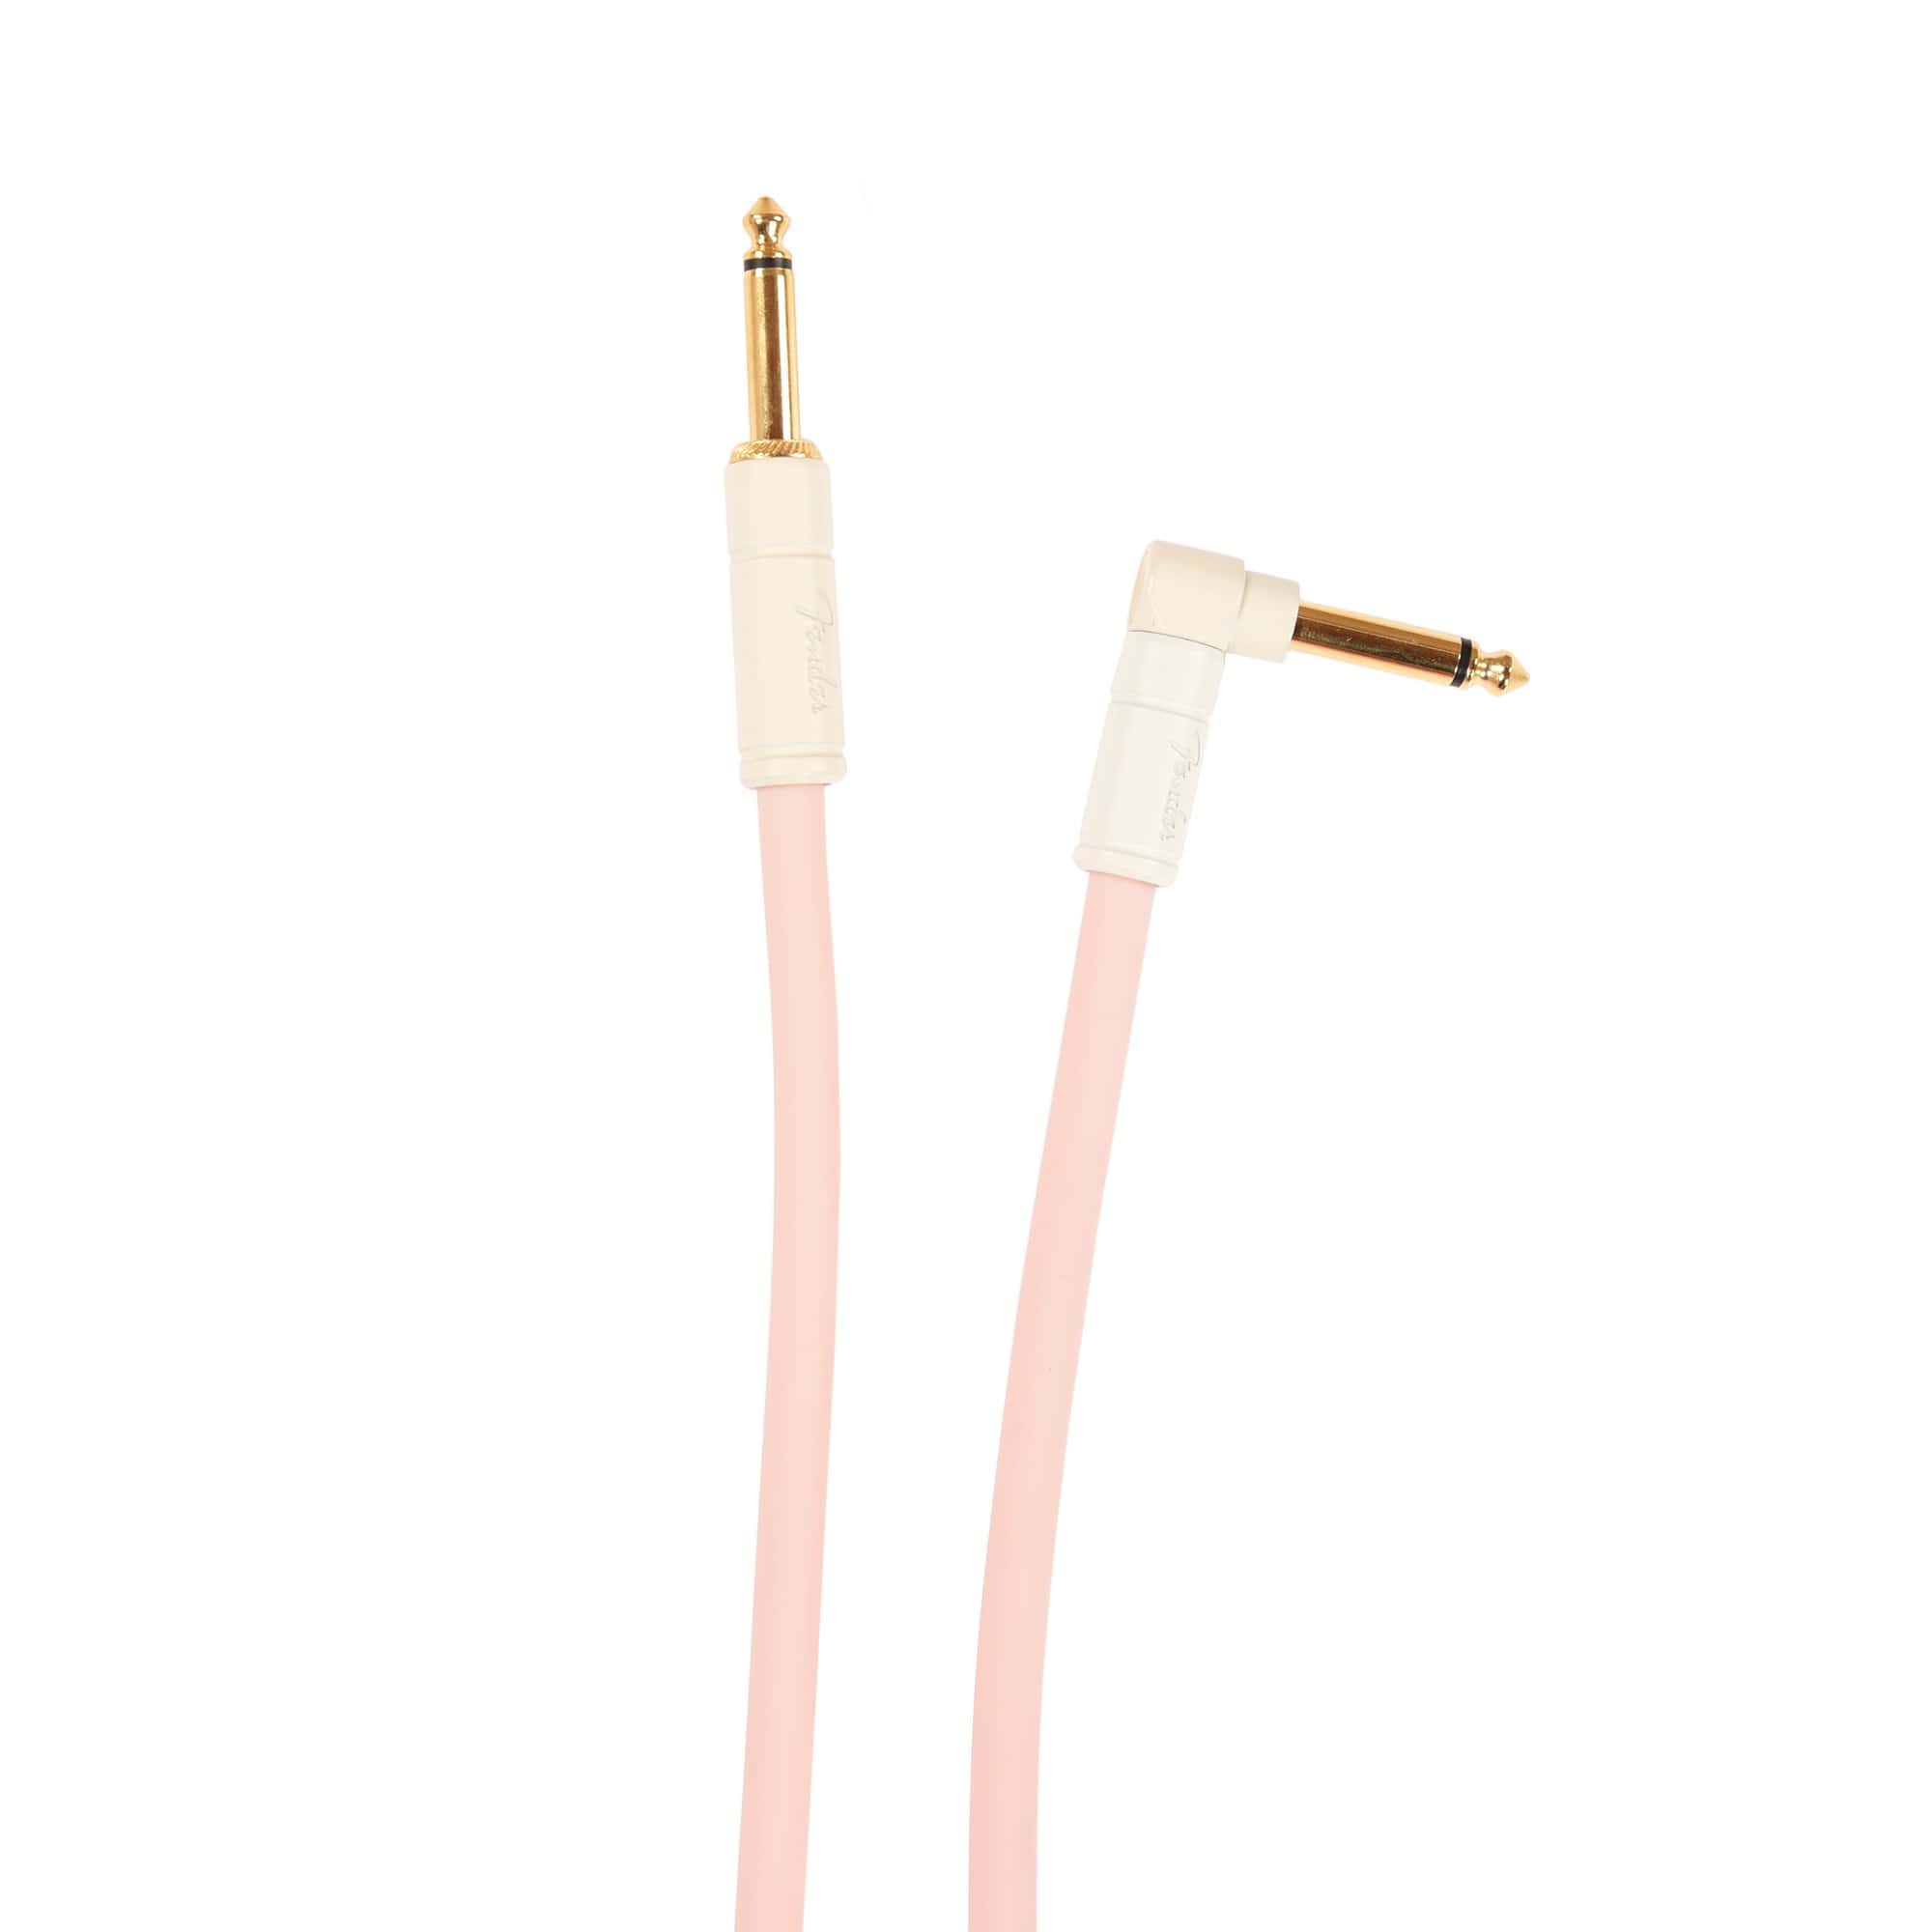 Fender Deluxe Instrument Cable Shell Pink 10' Angle-Straight